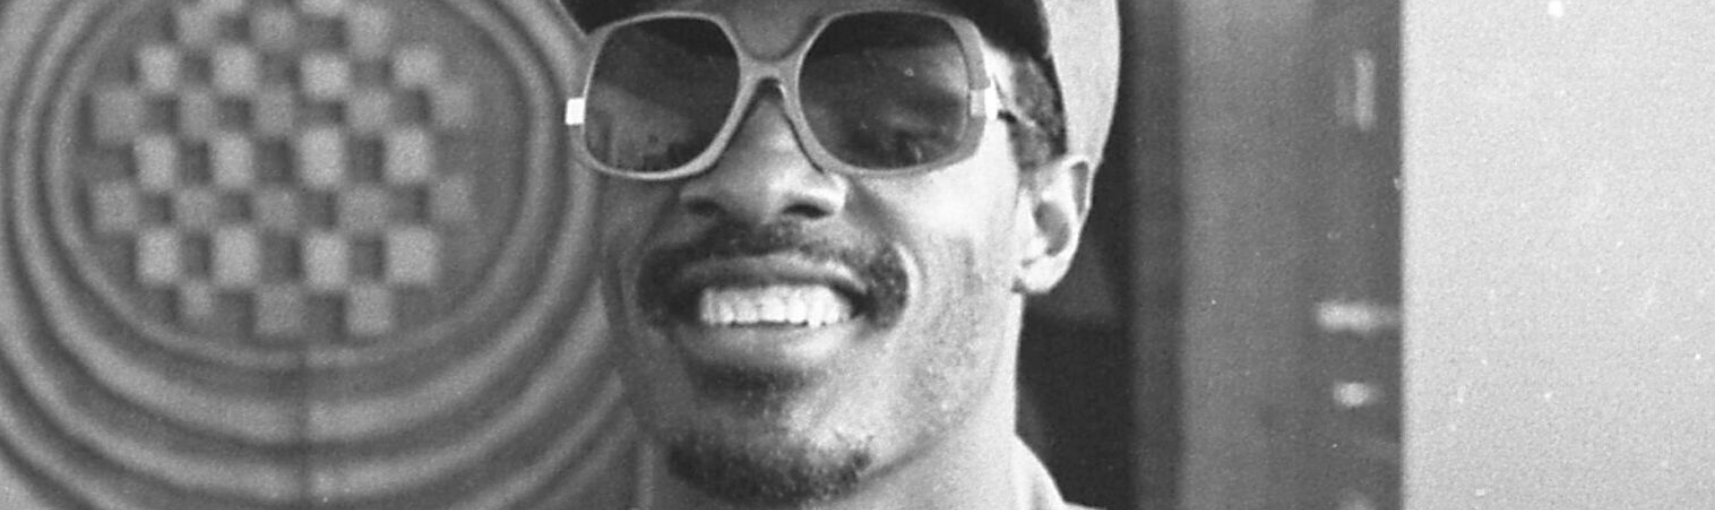 Black and white photo of a Black man smiling while wearing sunglasses